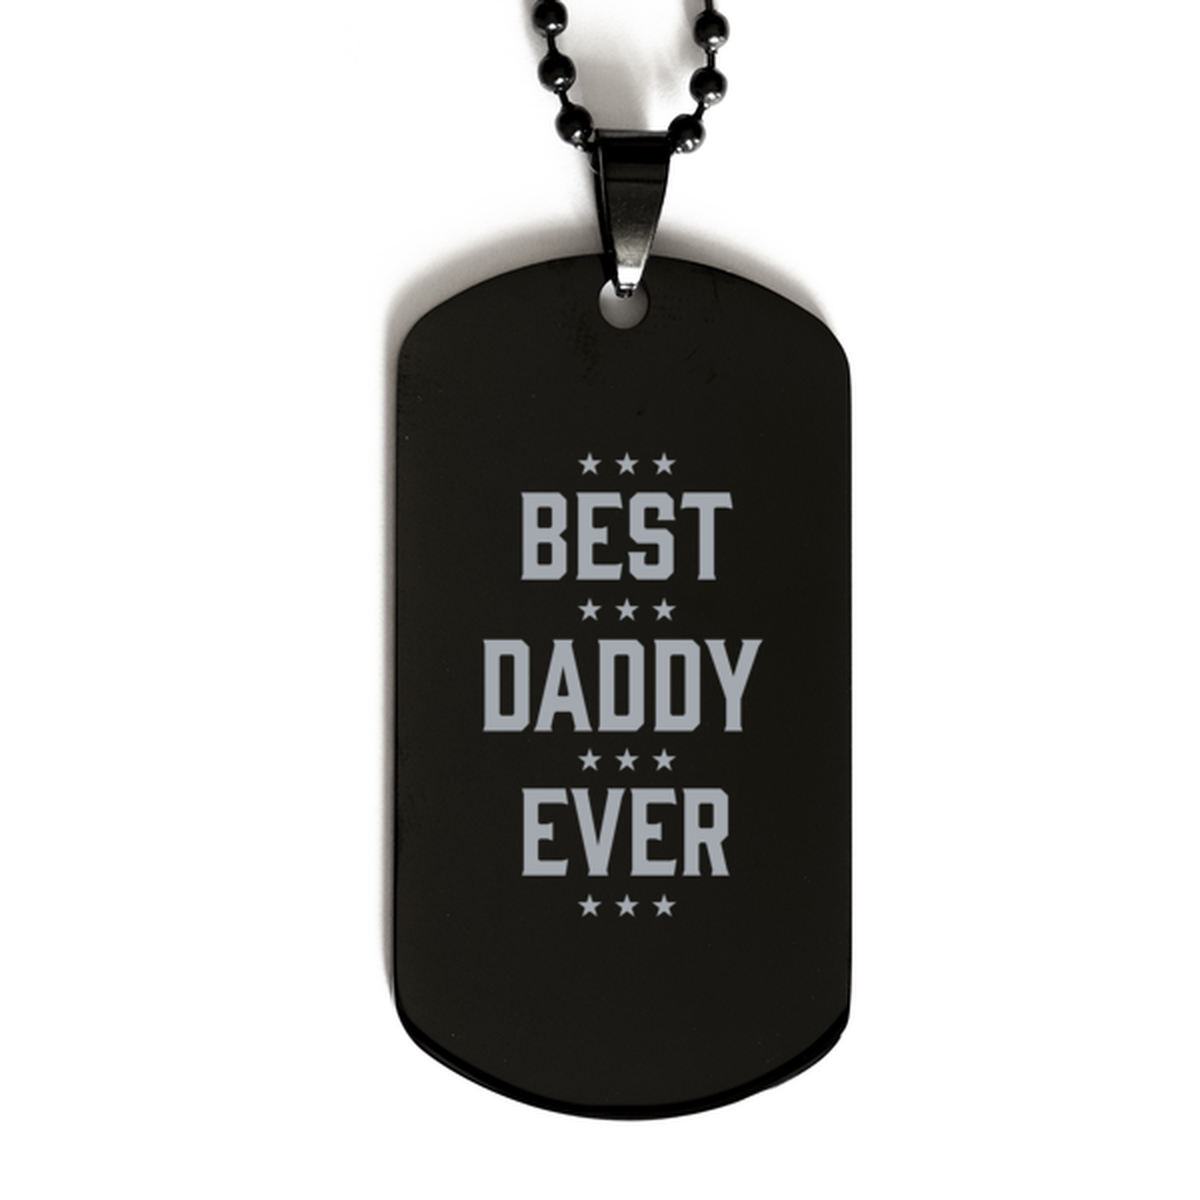 Best Daddy Ever Daddy Gifts, Funny Black Dog Tag For Daddy, Birthday Family Presents Engraved Necklace For Men